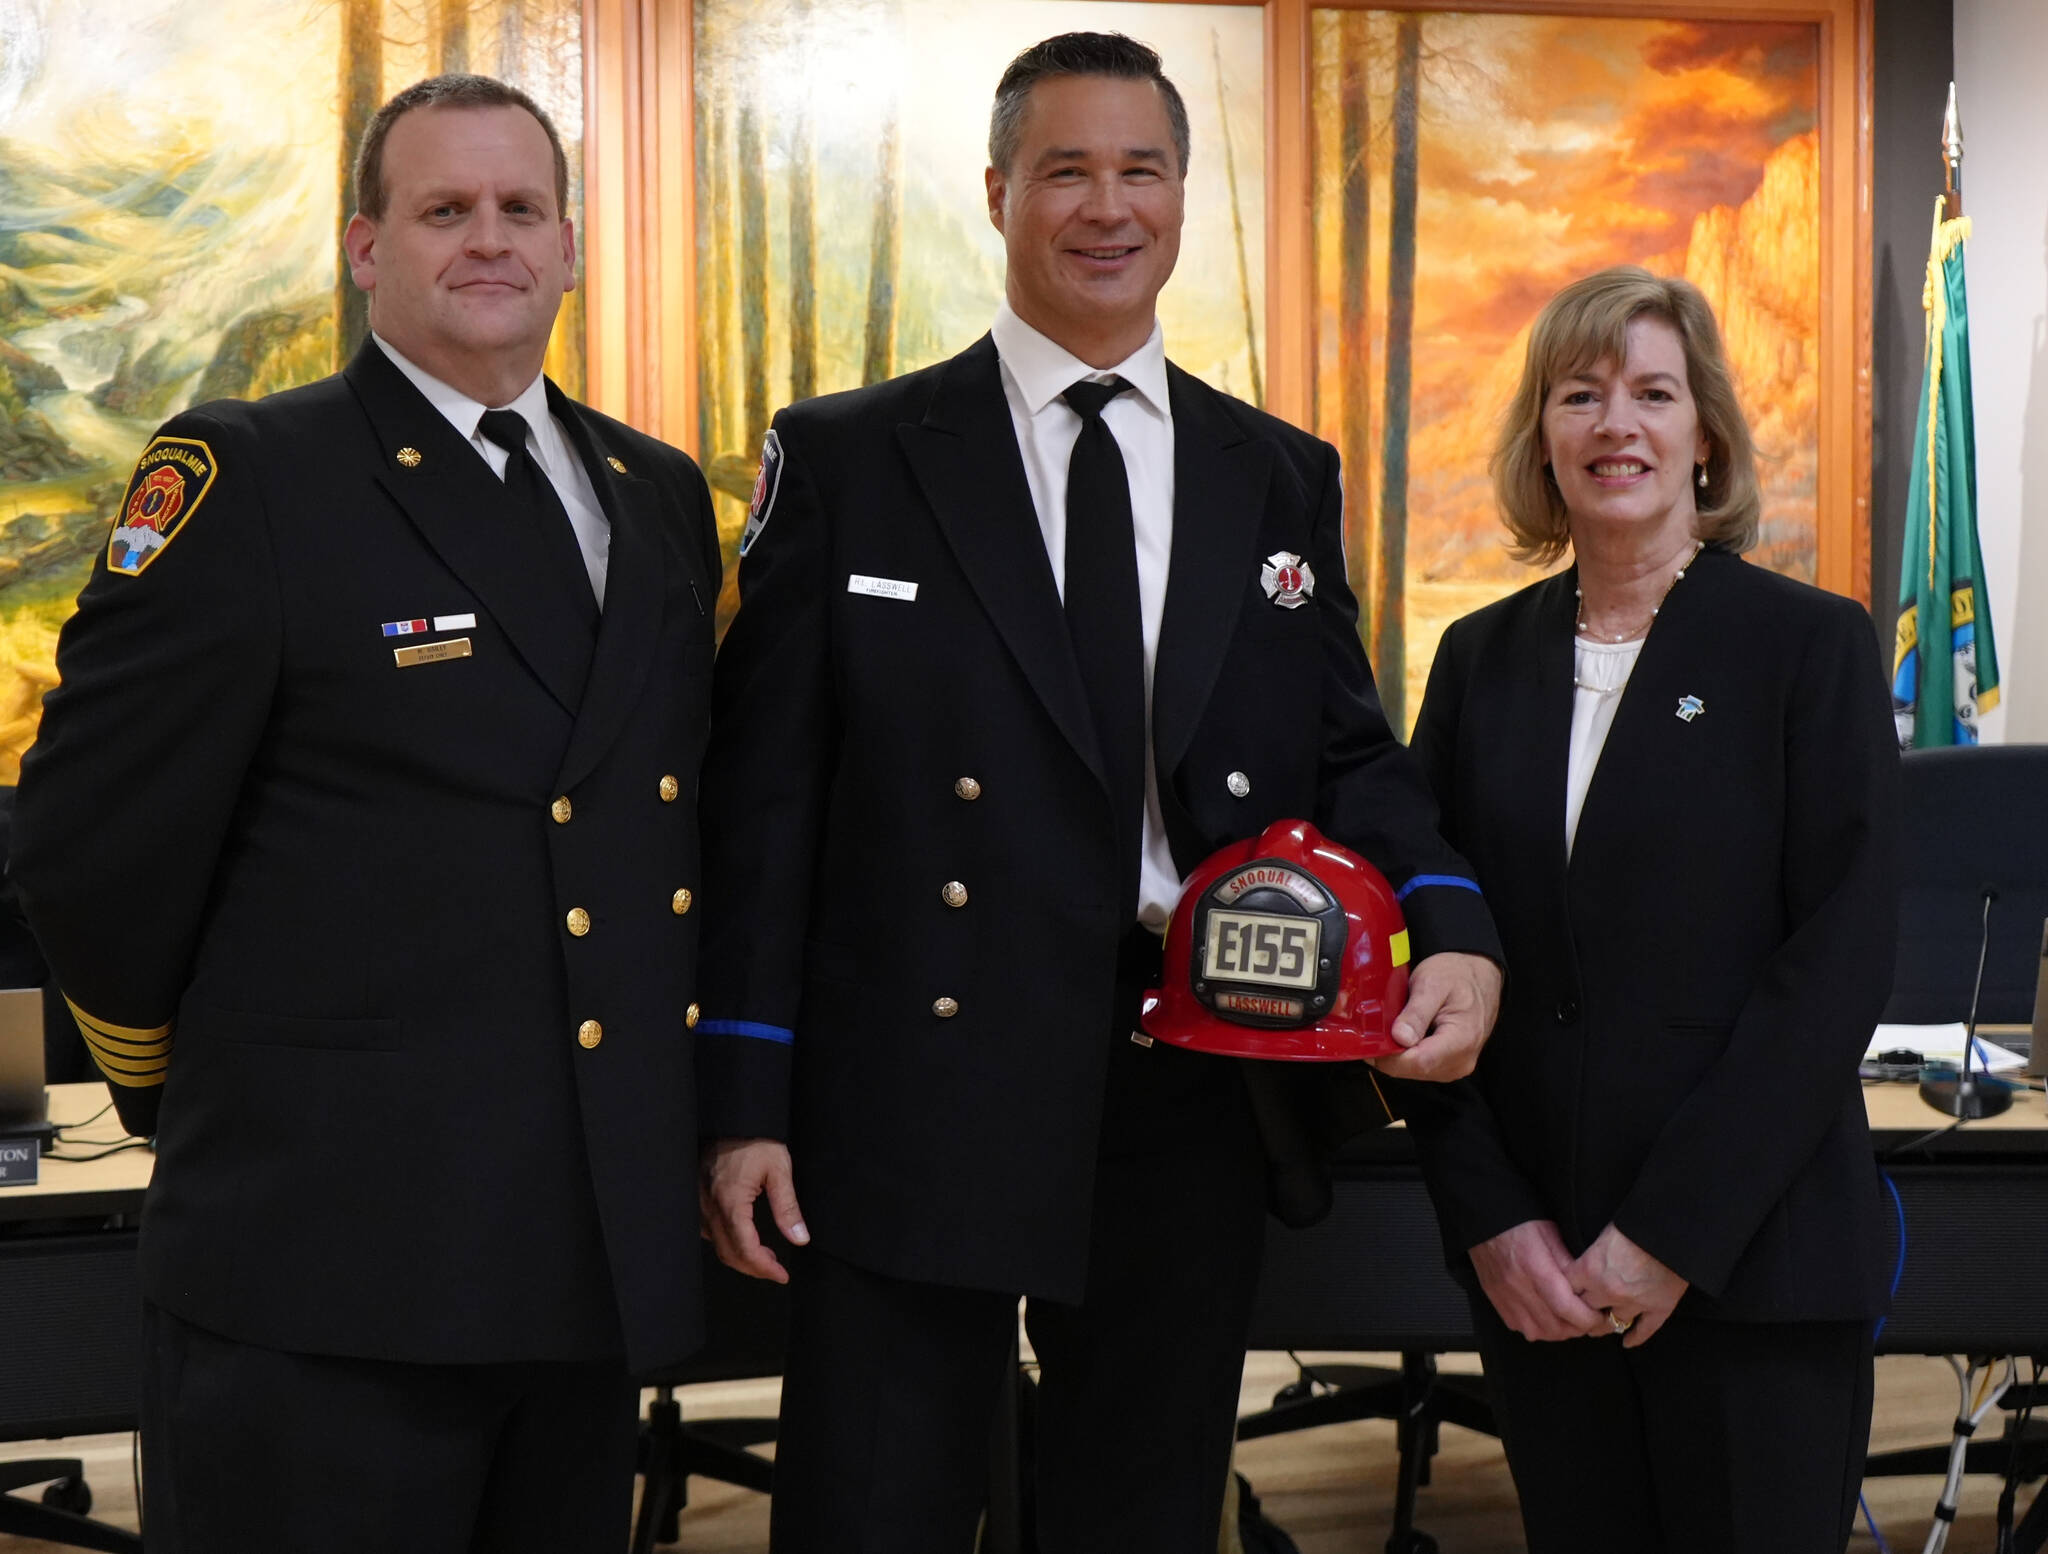 Fire Chief Mike Bailey (left), Lieutenant Robert Lasswell (middle) and Mayor Katherine Ross (right) at the Monday meeting of the Snoqualmie City Council. Photo courtesy of the Snoqualmie City Council